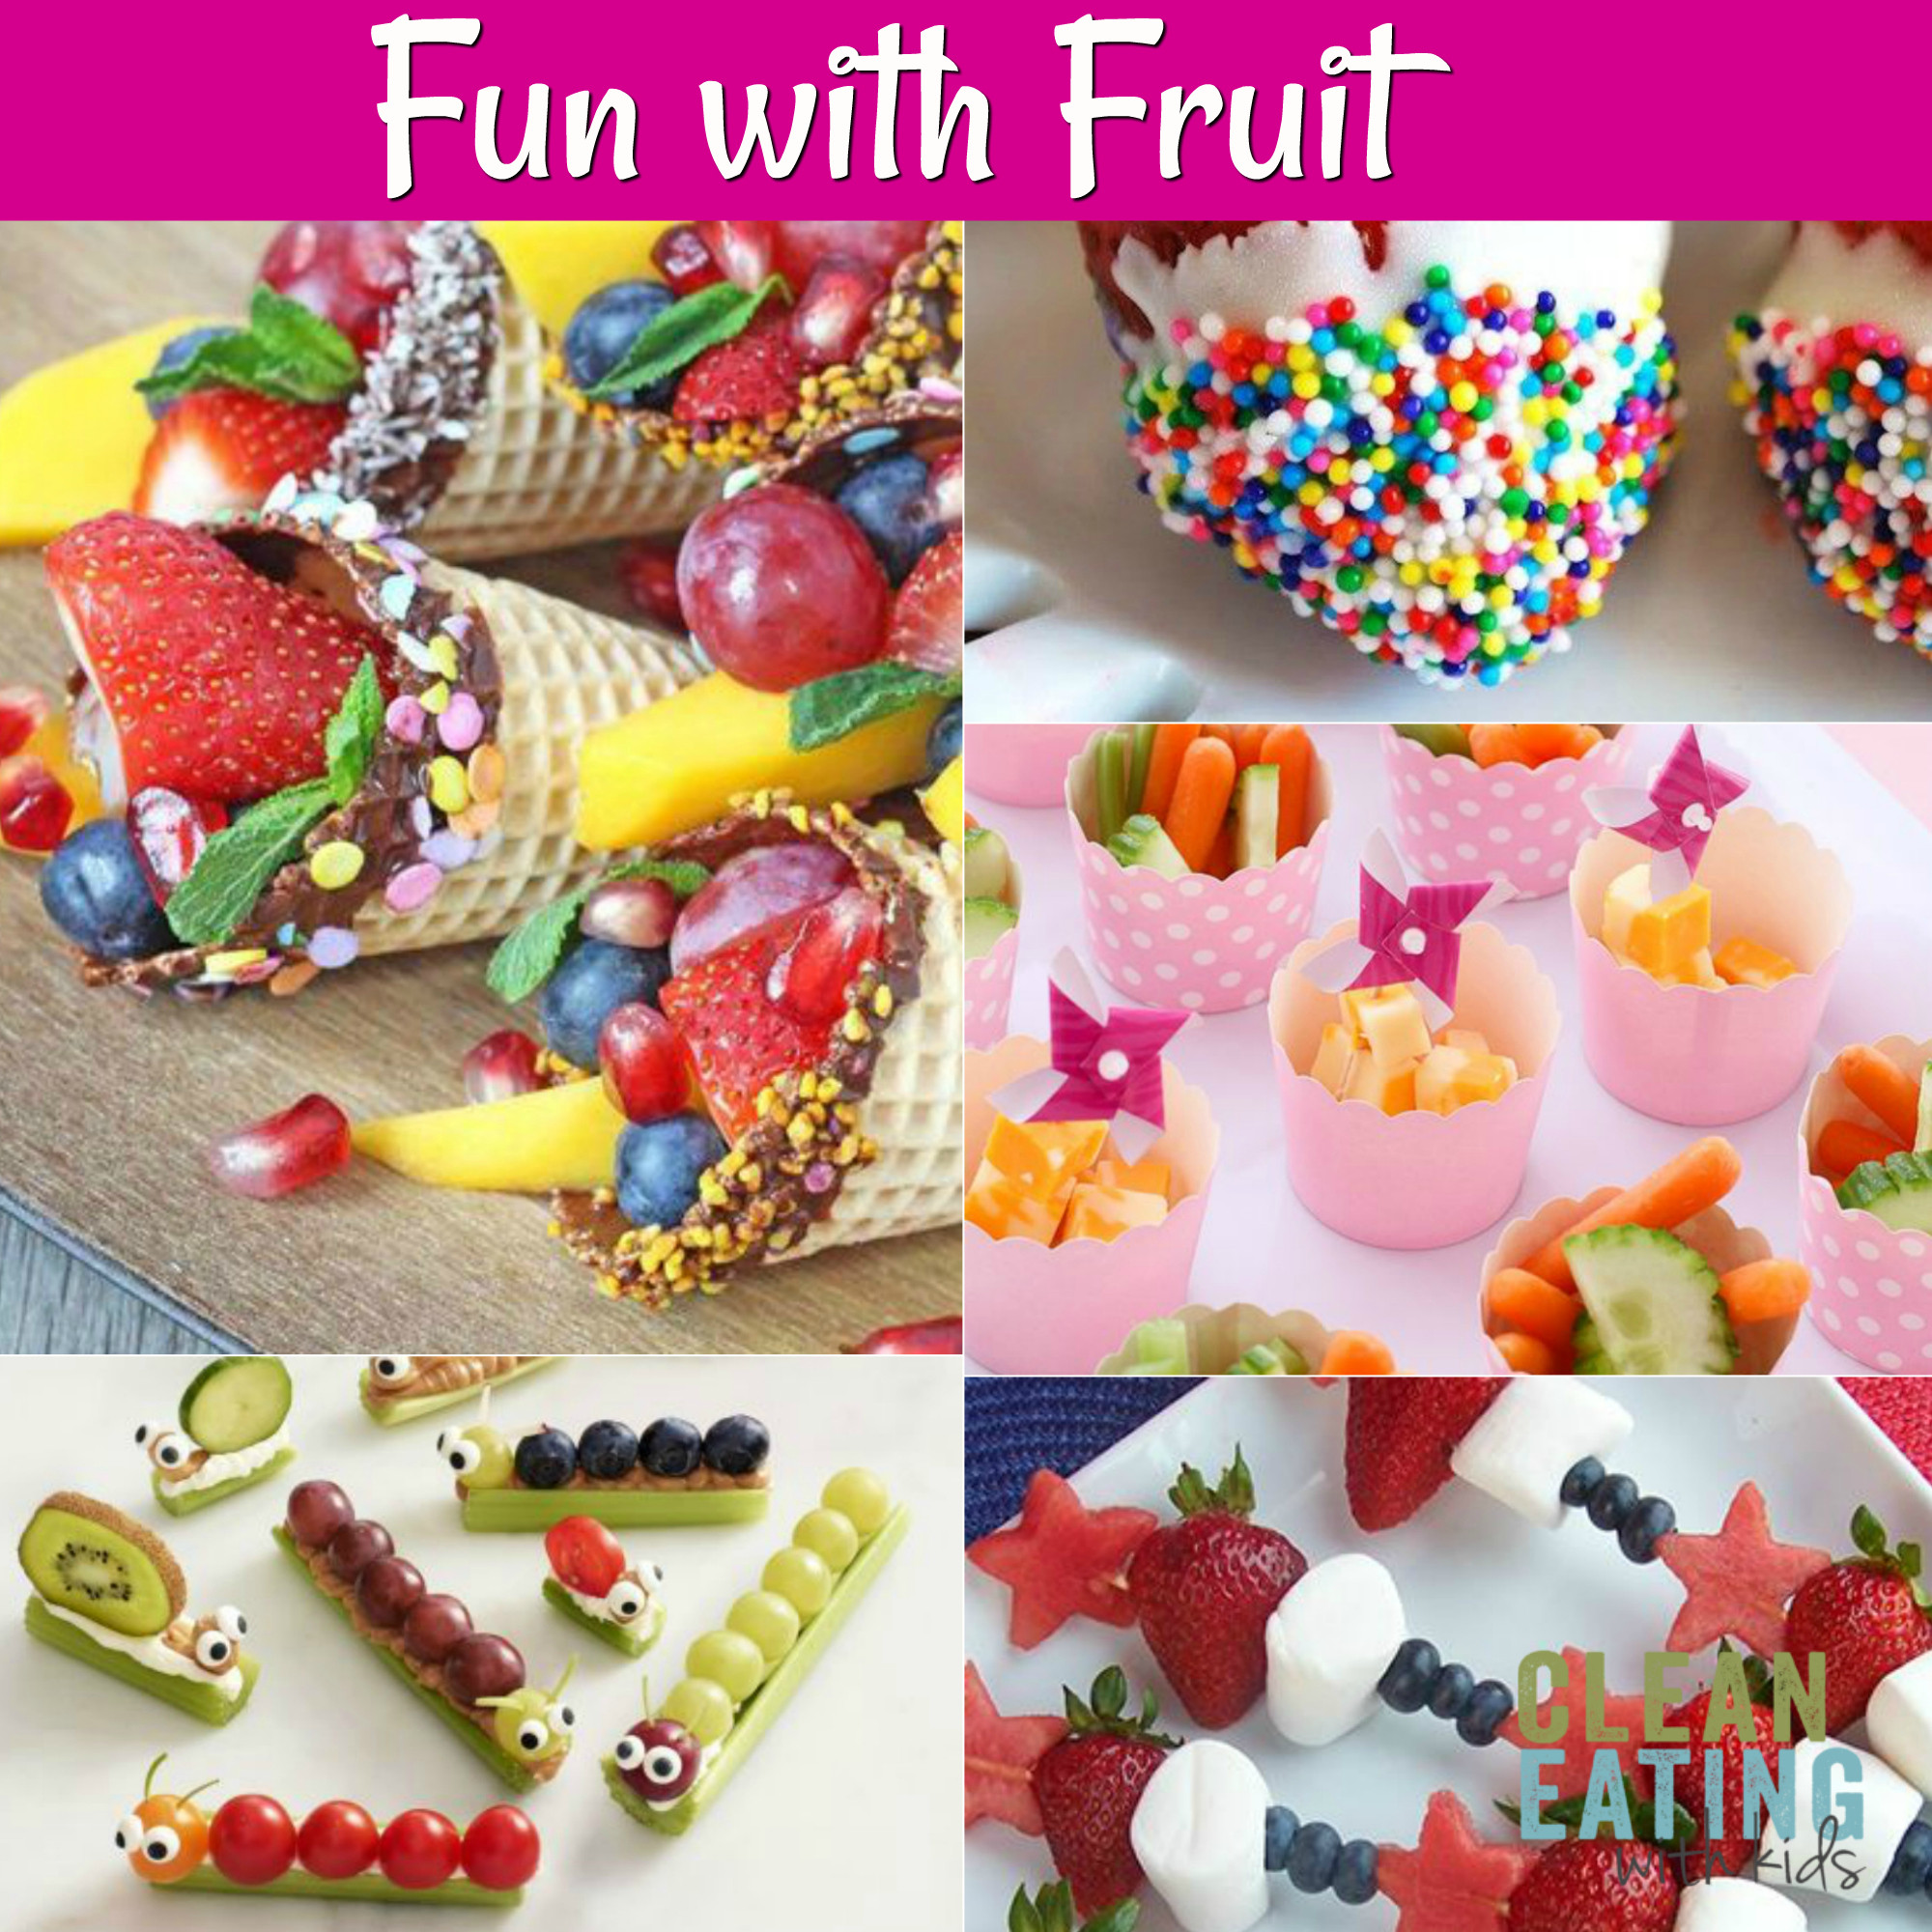 Toddlers Birthday Party Food Ideas
 25 Healthy Birthday Party Food Ideas Clean Eating with kids